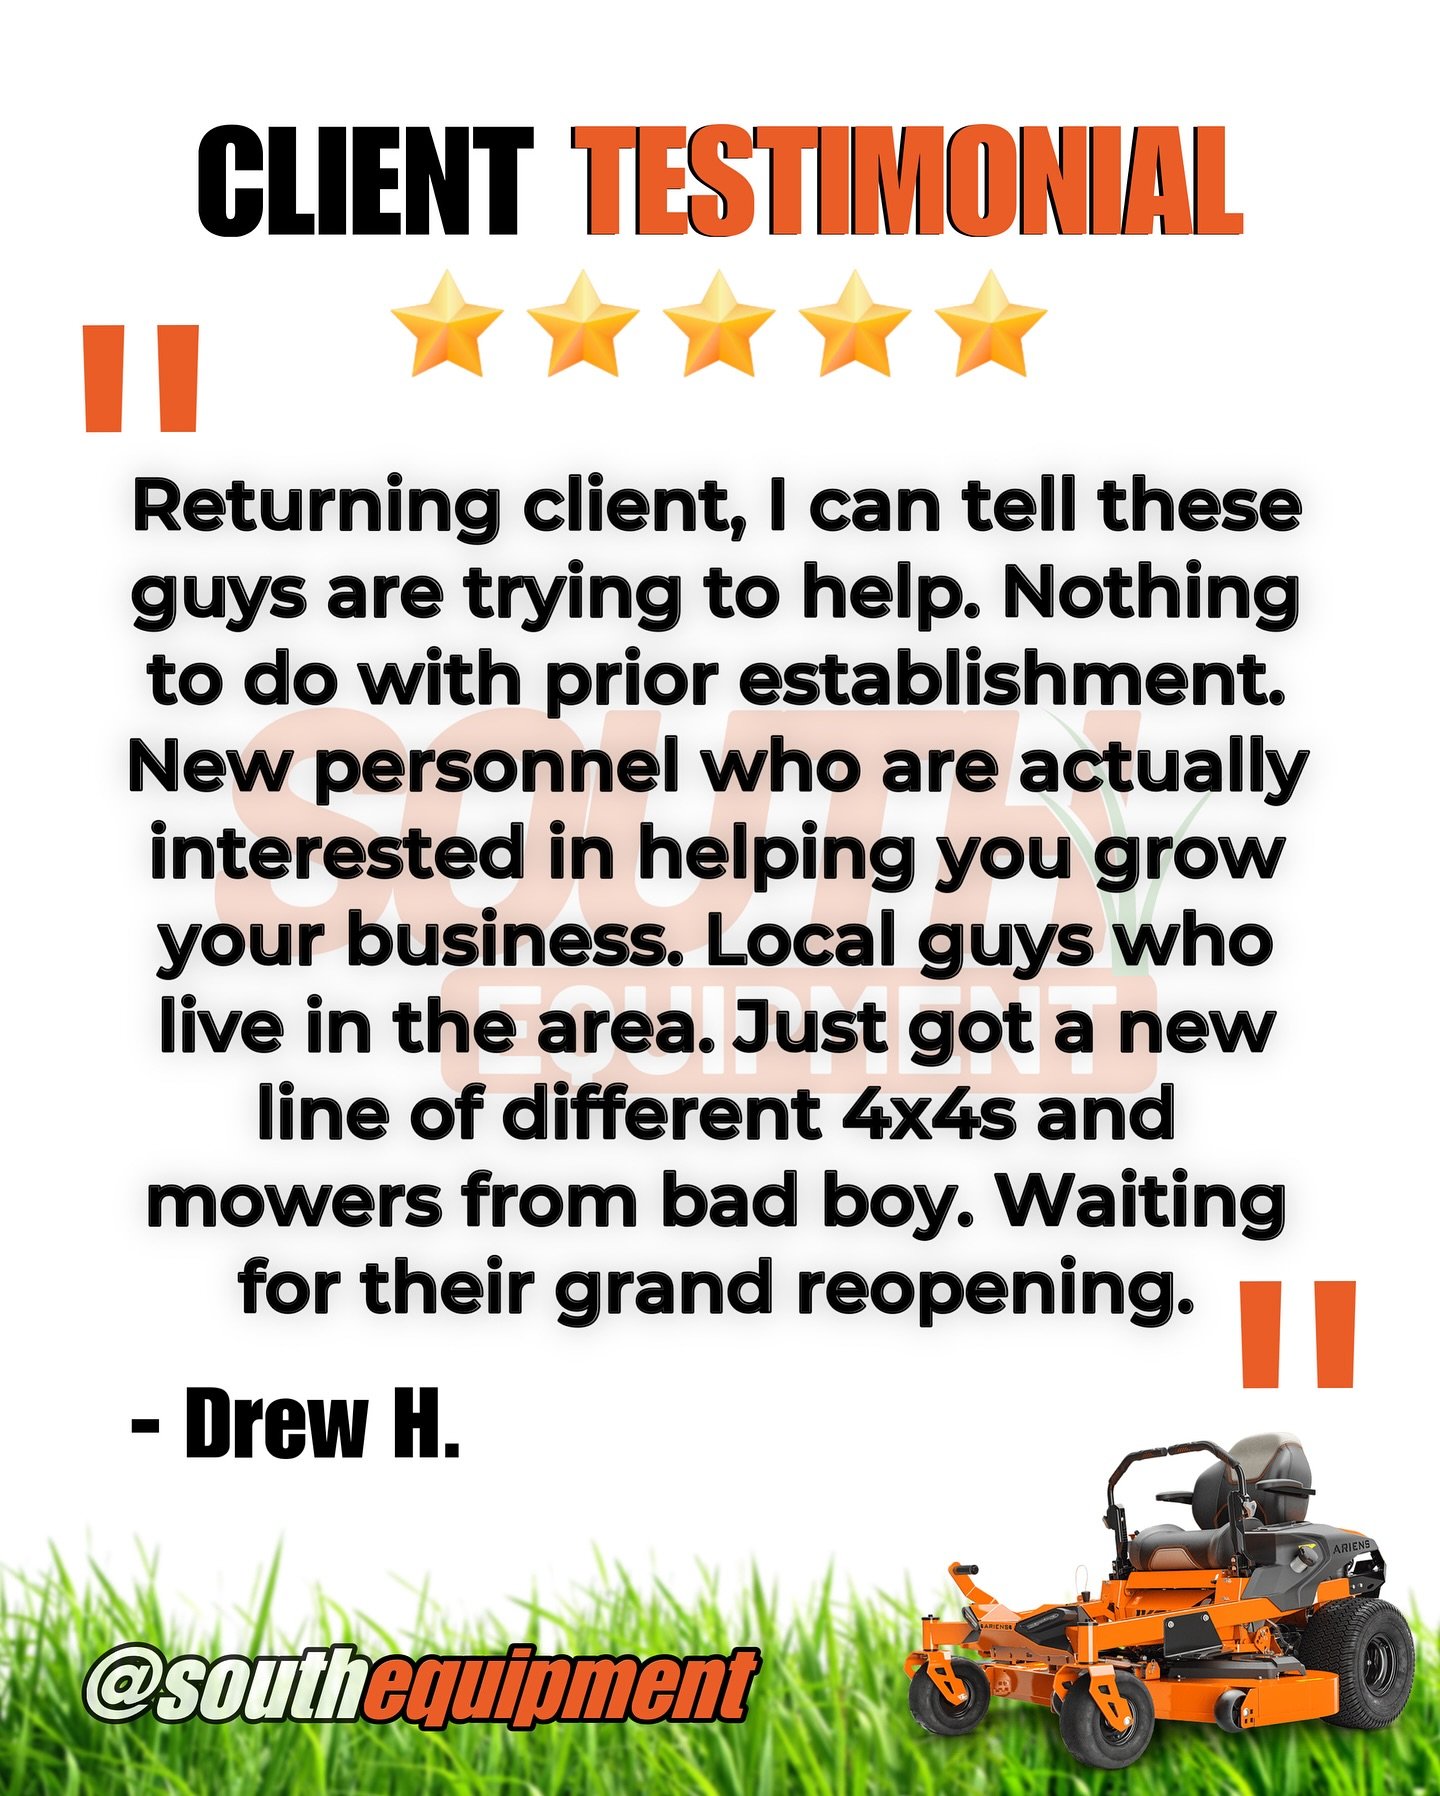 🌟 5-Star Review 📣
We&rsquo;re thrilled to hear that you&rsquo;ve had a positive experience with our team. Our goal is to support our customers and help them grow their businesses. We&rsquo;re excited about our new line of 4x4s and mowers from Bad B